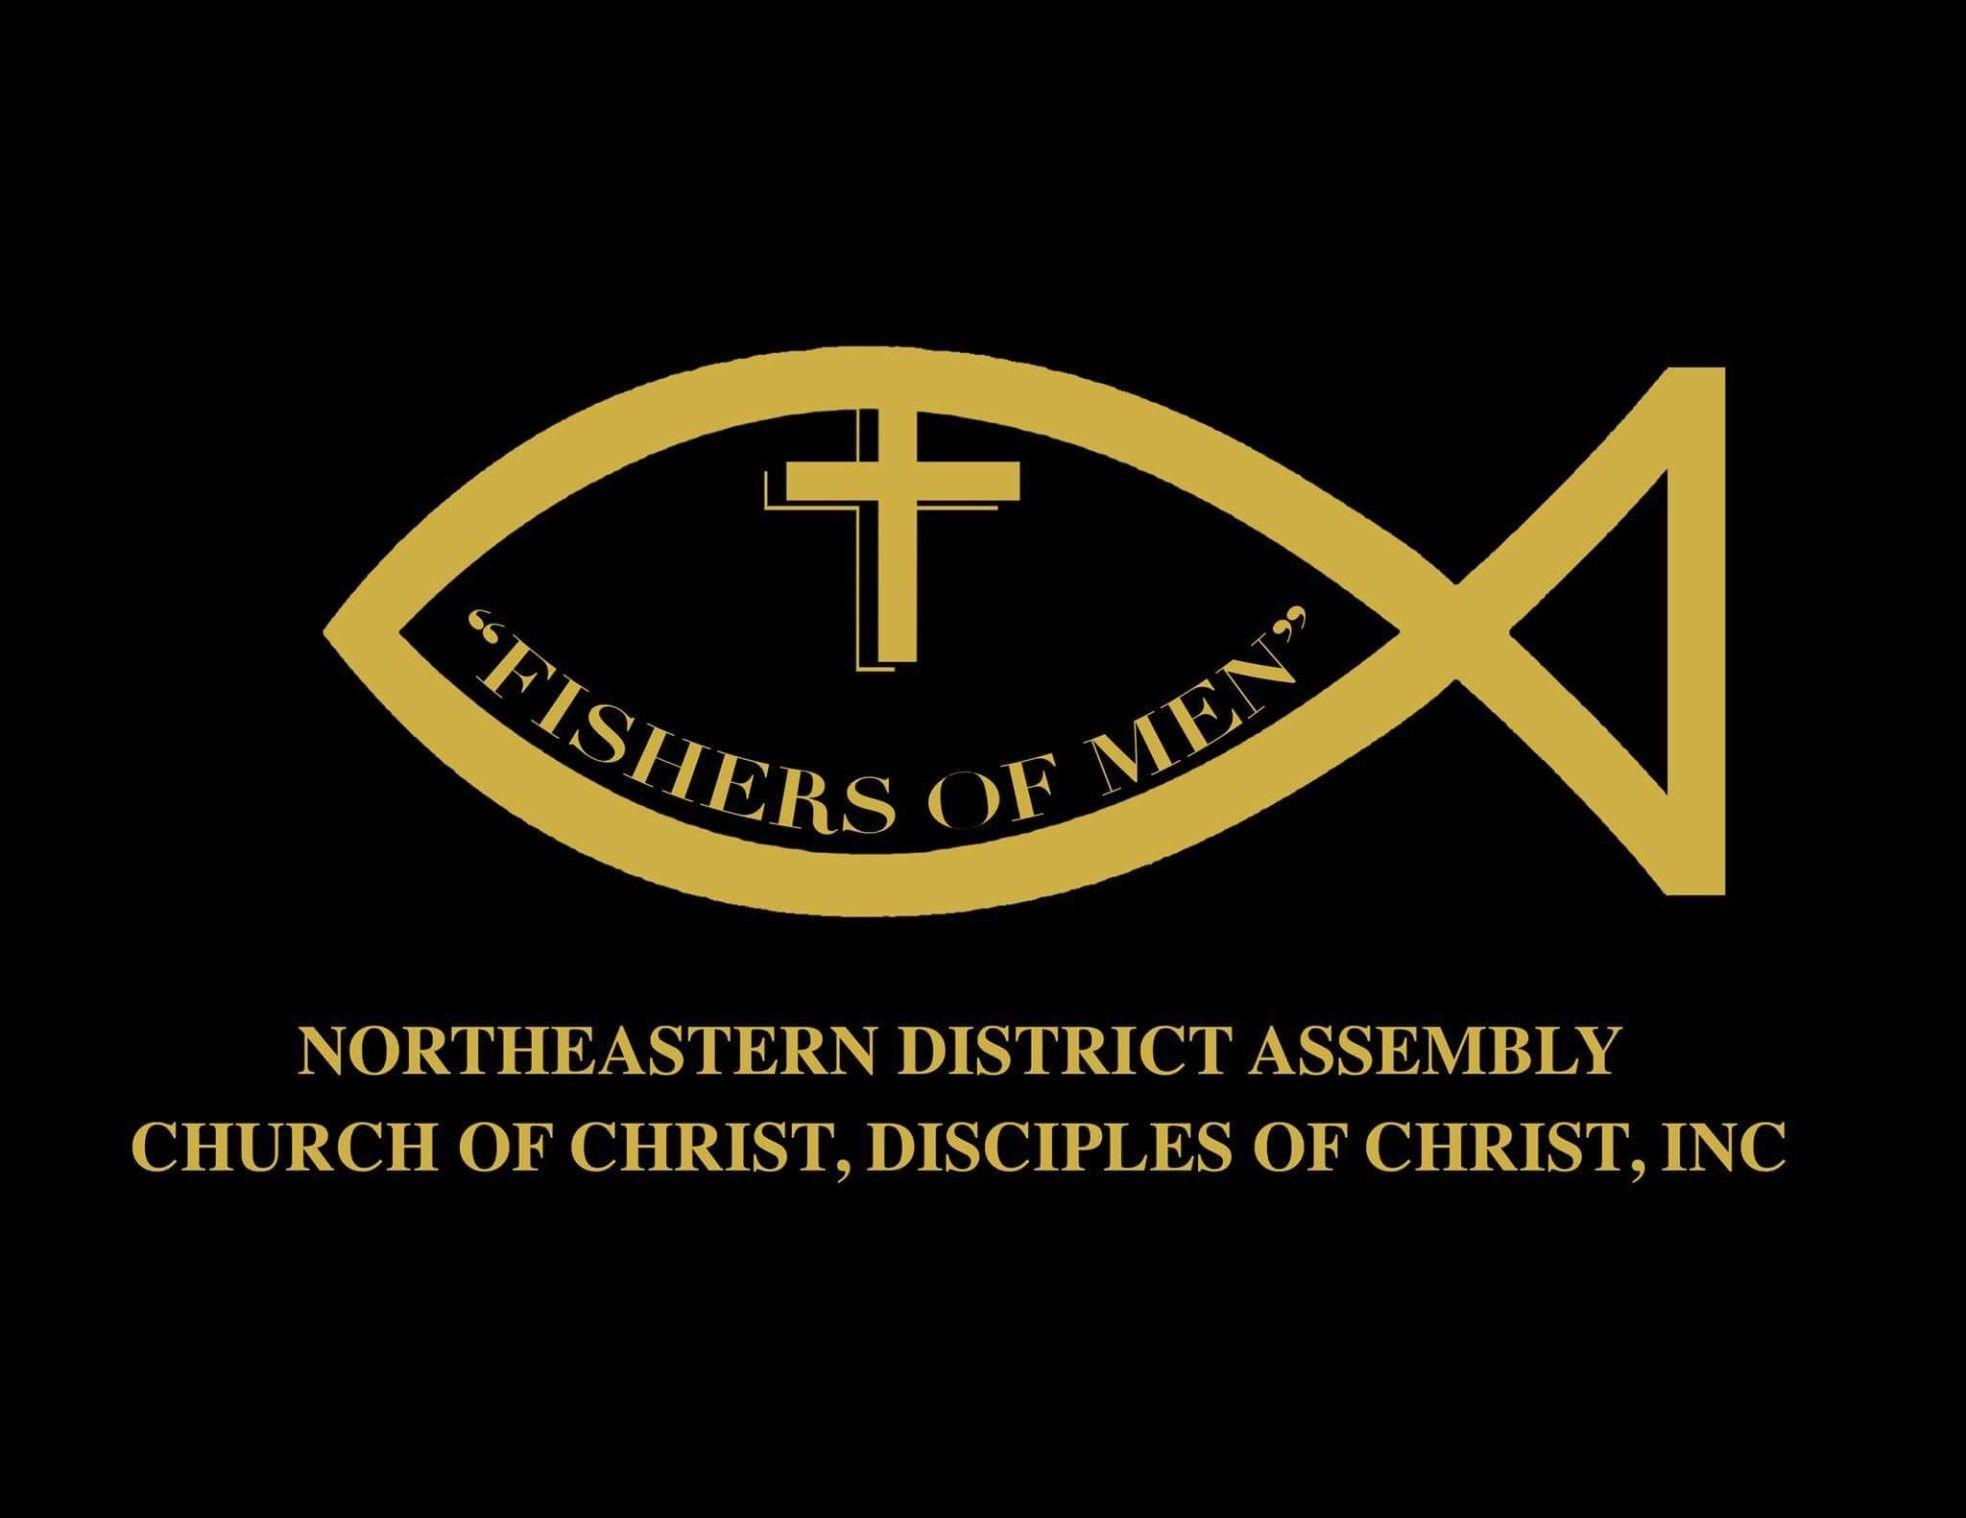 Disciples Women Logo - The Northeastern District Assembly Church of Christ, Disciples